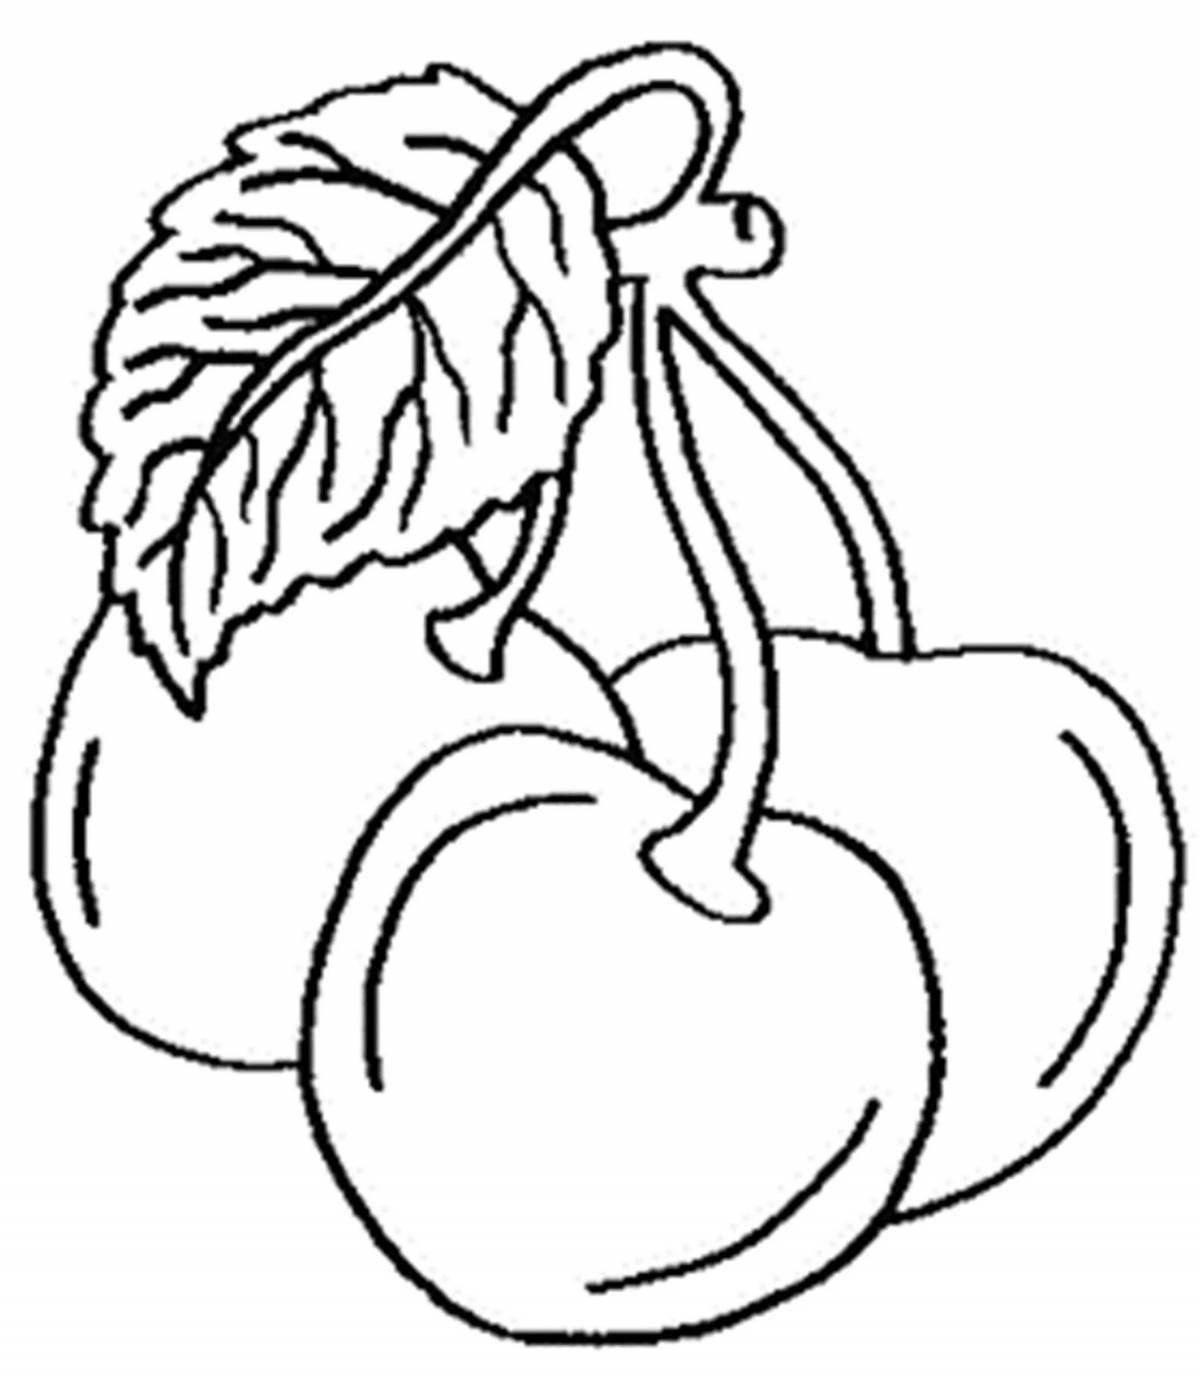 Exciting coloring pages with fruits for children 5-6 years old